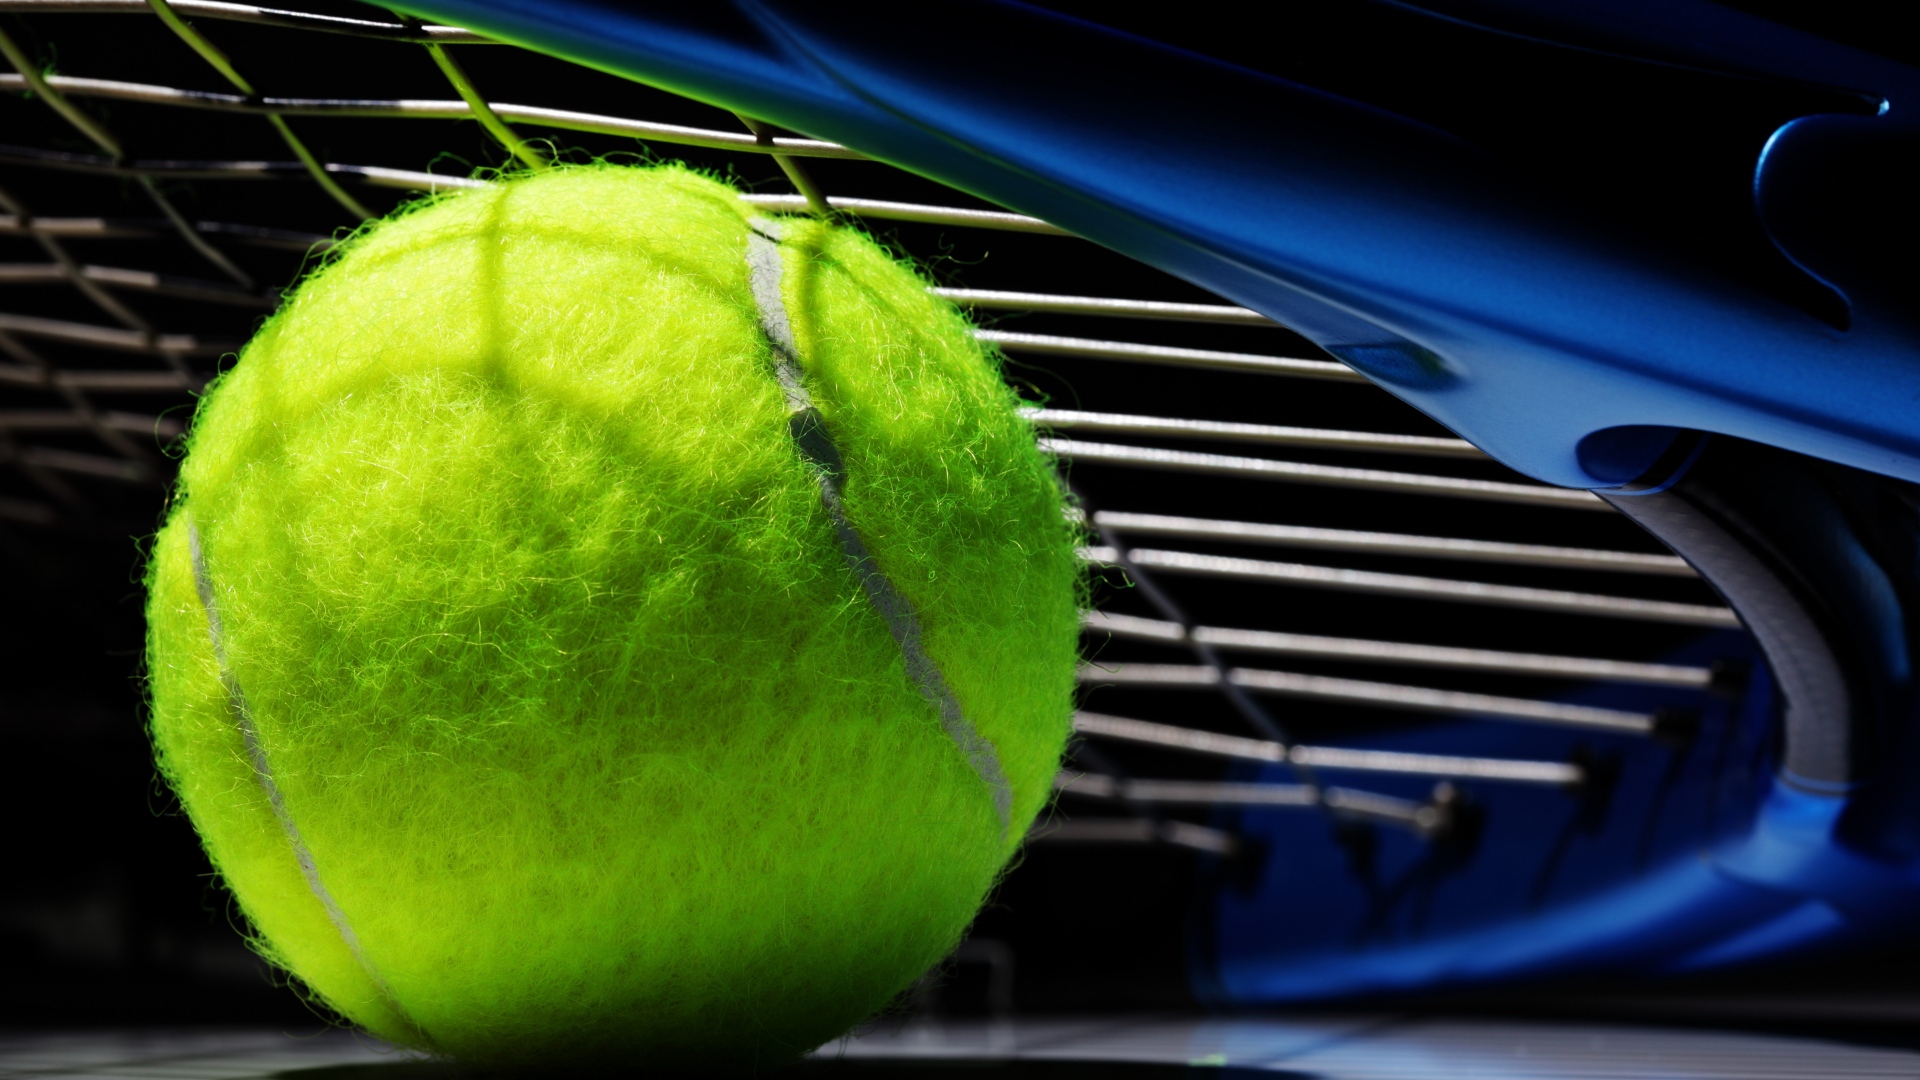 Tennis today 29.07. Schedule, Predictions & Betting Tips